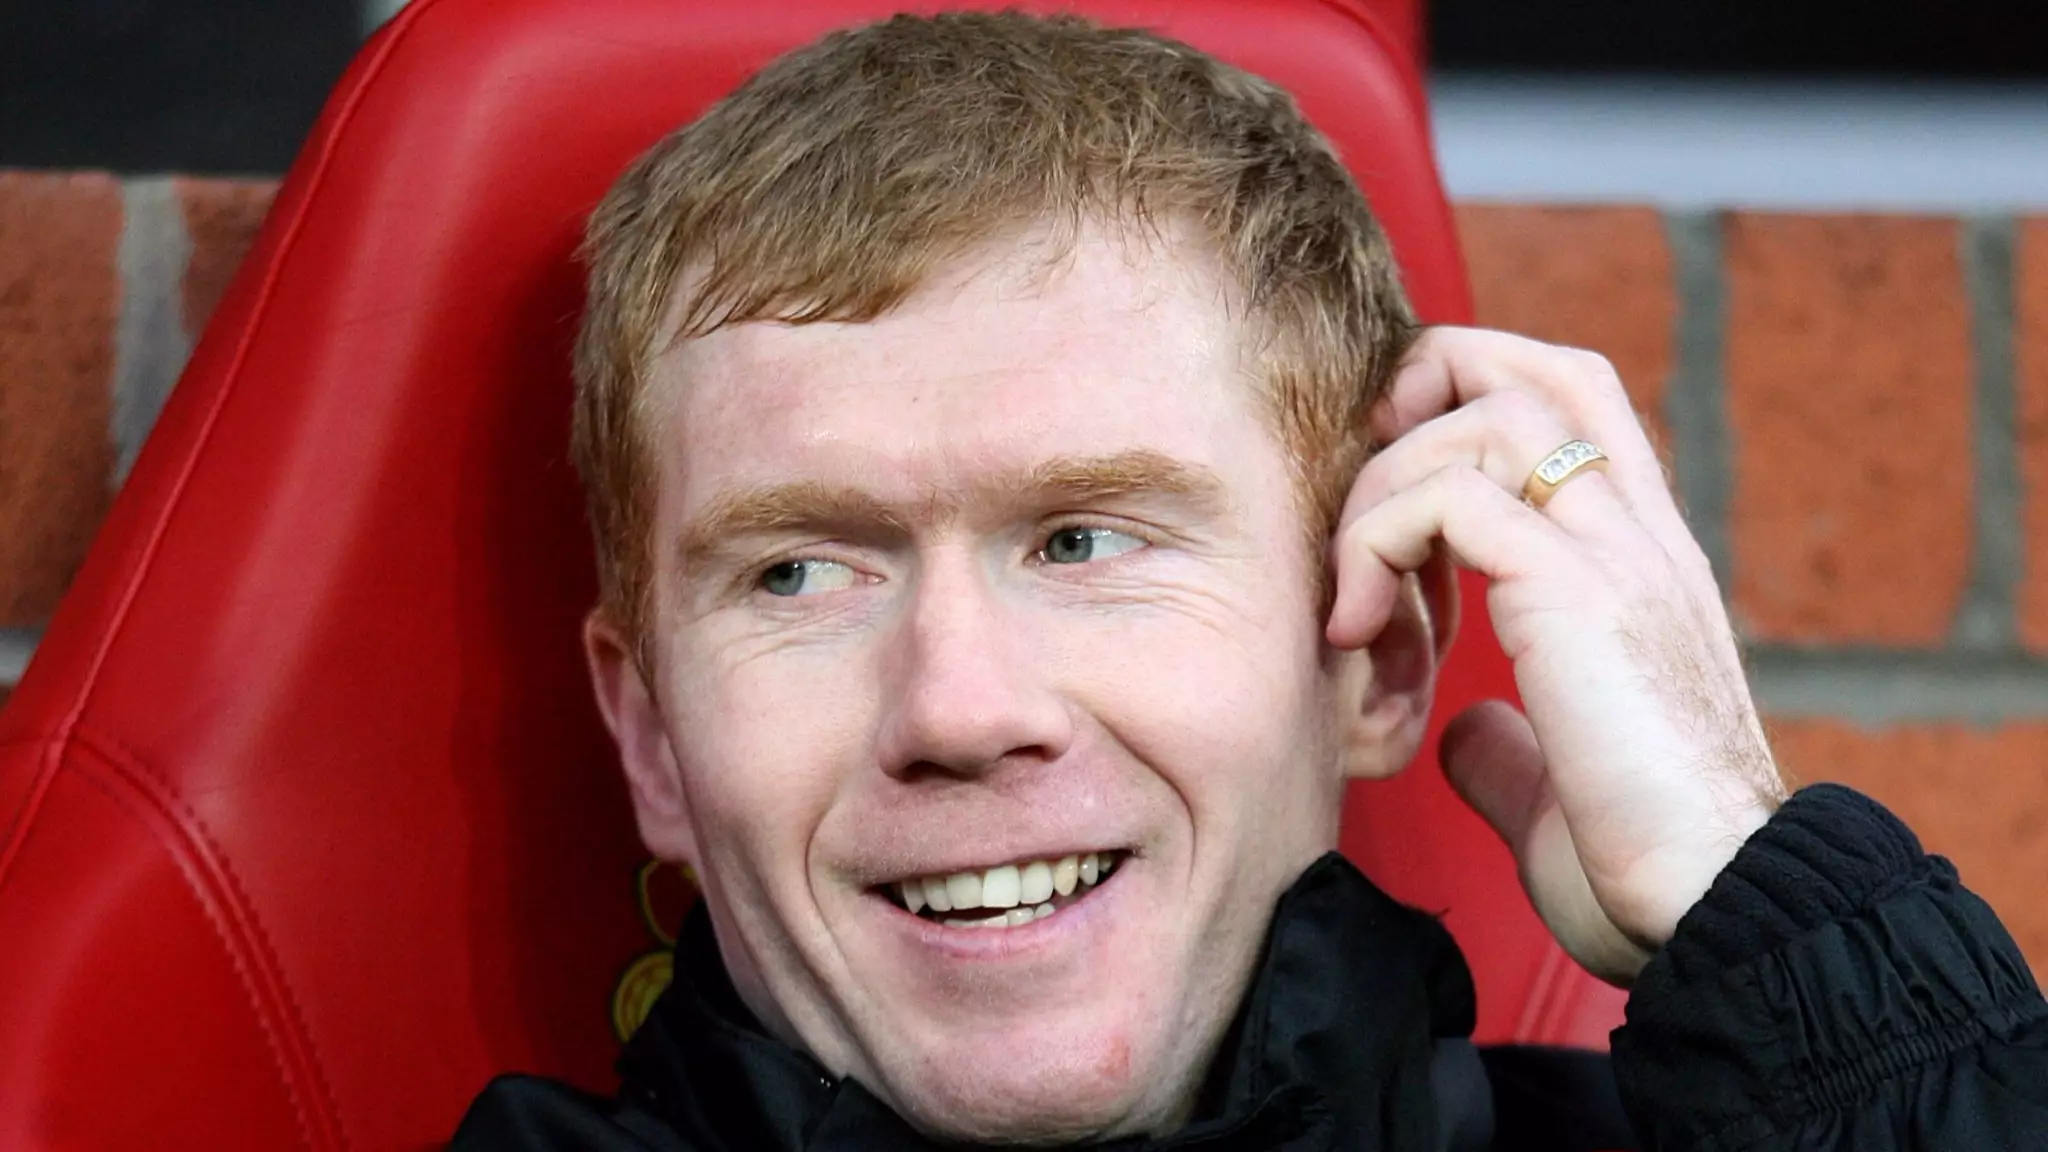 Paul Scholes Spills The Beans That Manchester United Players Wanted To Kick Ronaldinho